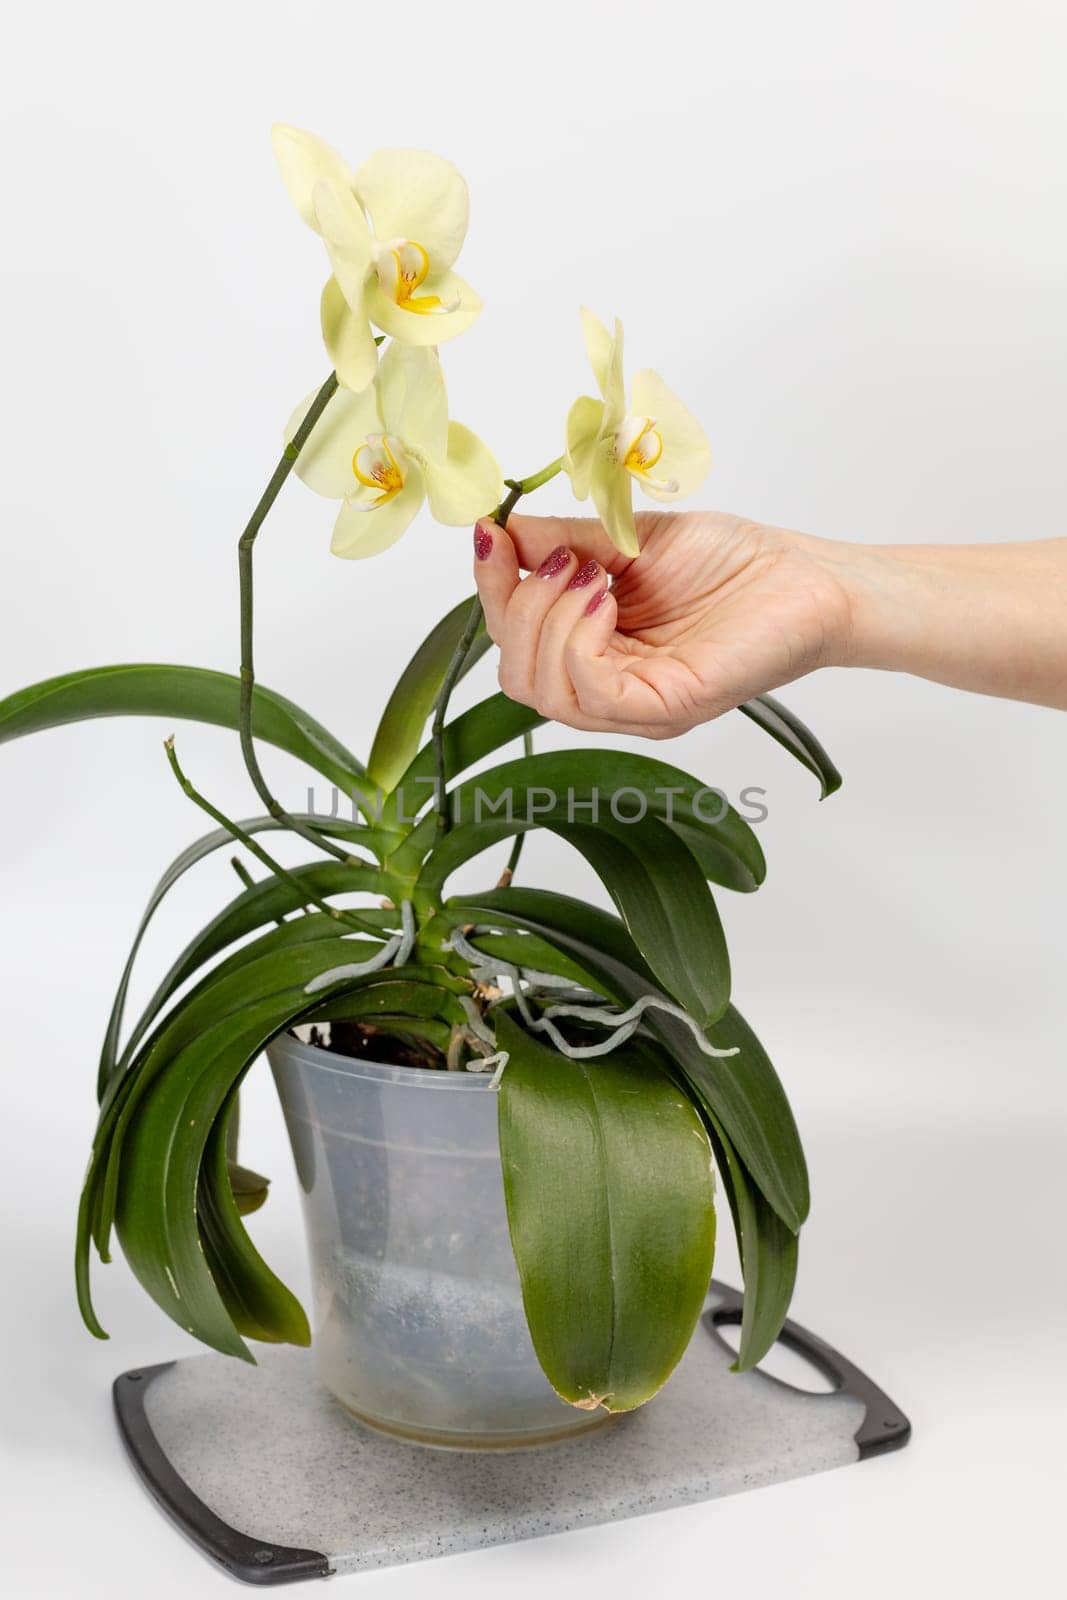 Woman's hand holding a branch of yellow phalaenopsis orchid flowers on the white background. Tropical flower.